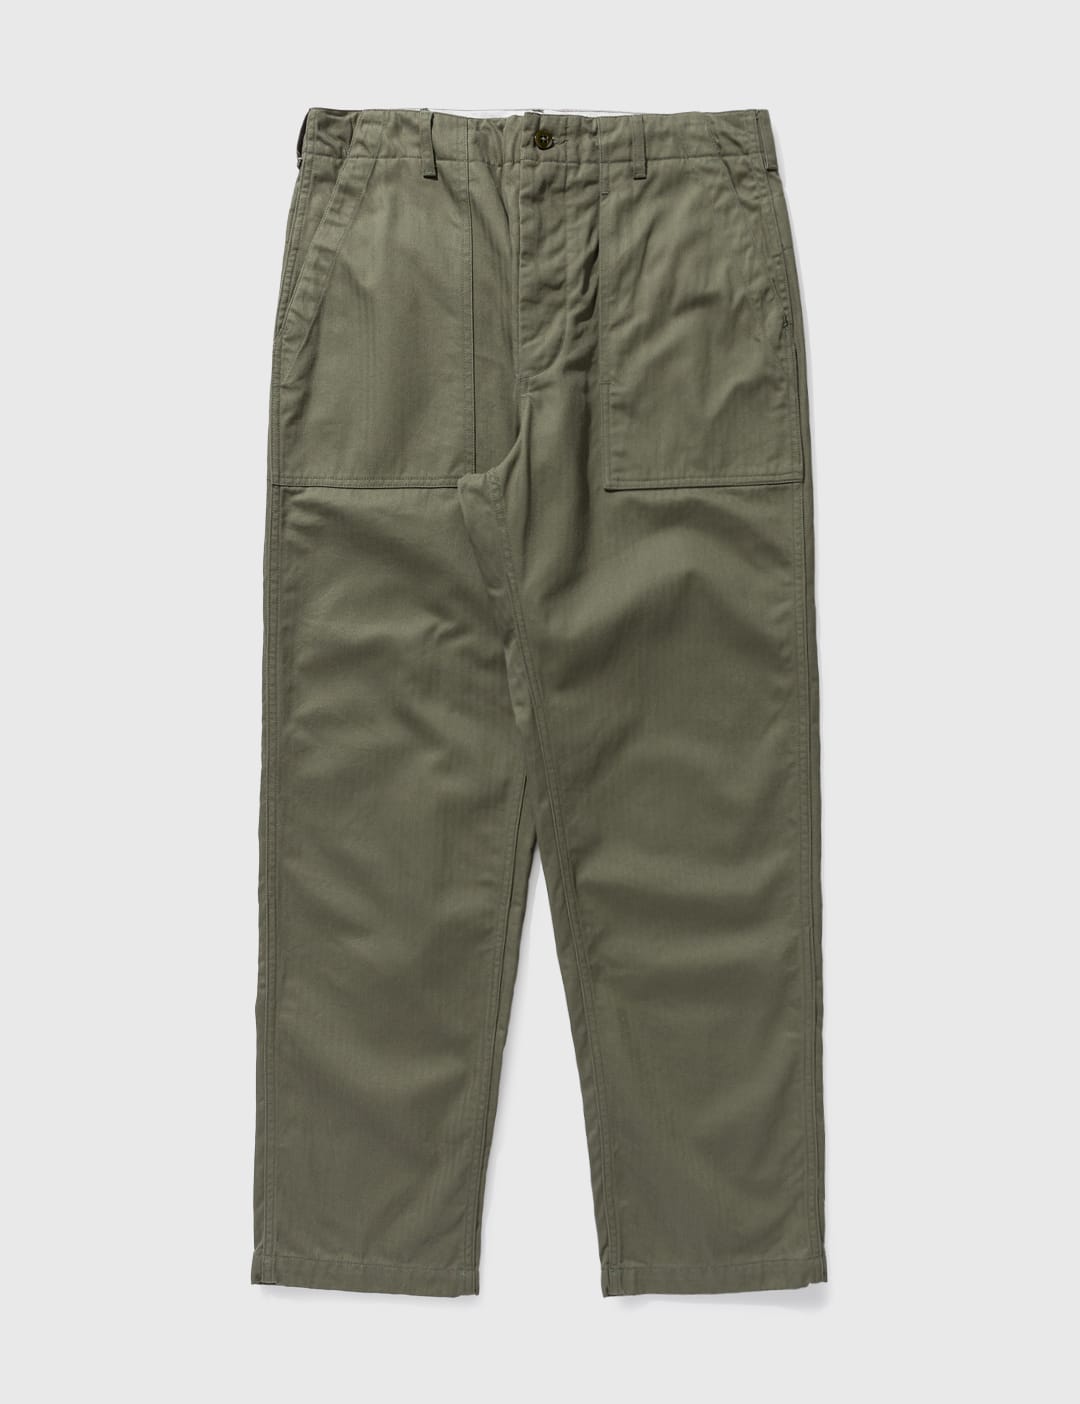 Engineered Garments - FATIGUE PANTS | HBX - Globally Curated